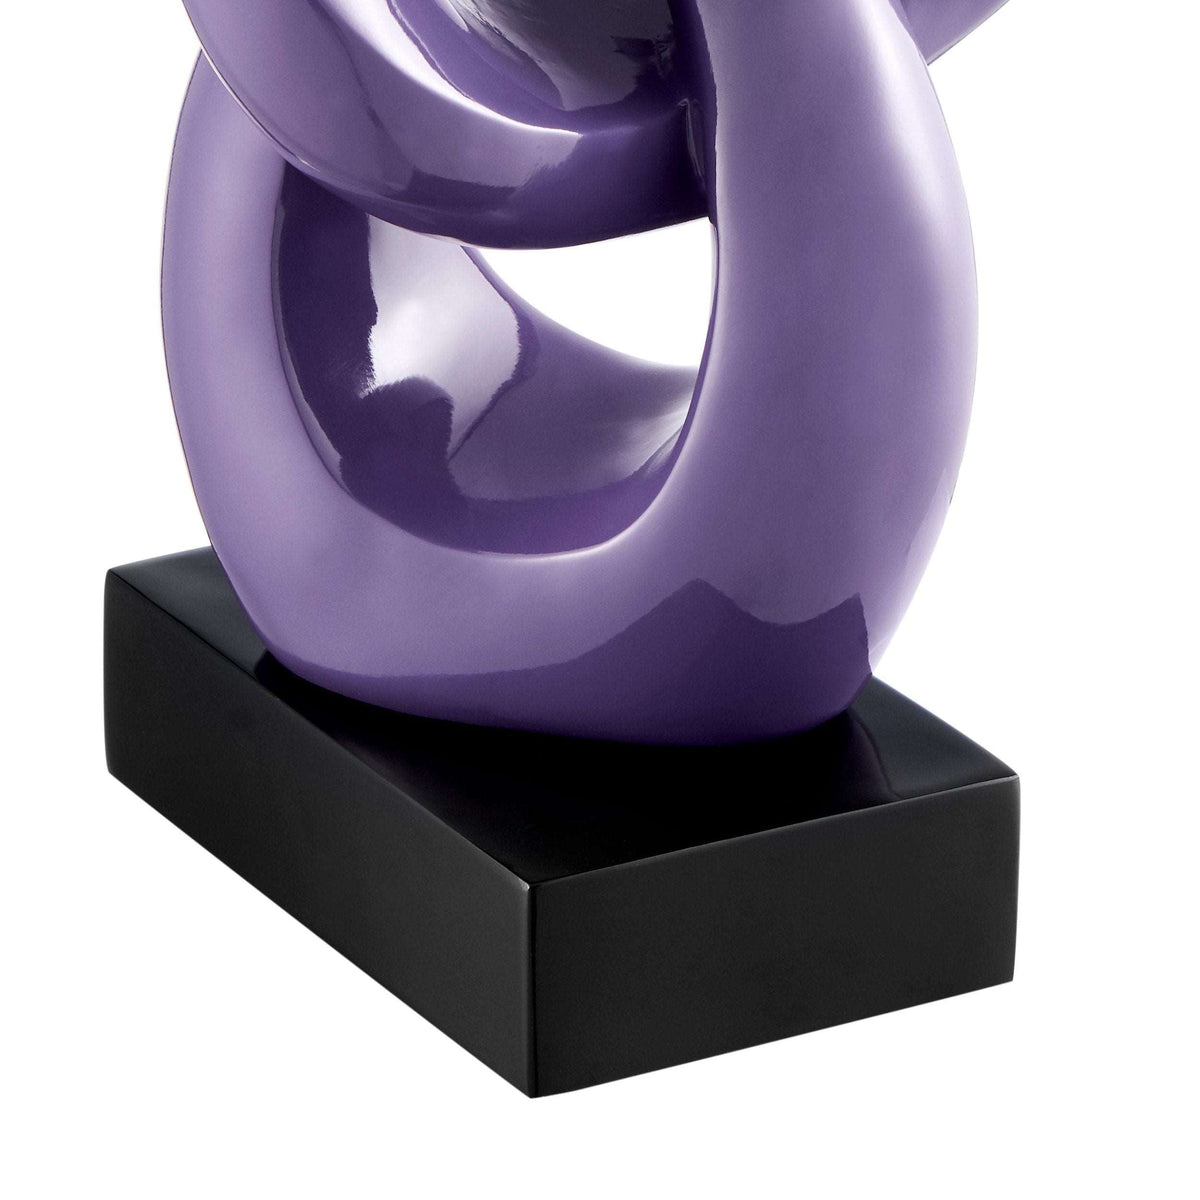 Antilia Abstract Sculpture in Violet